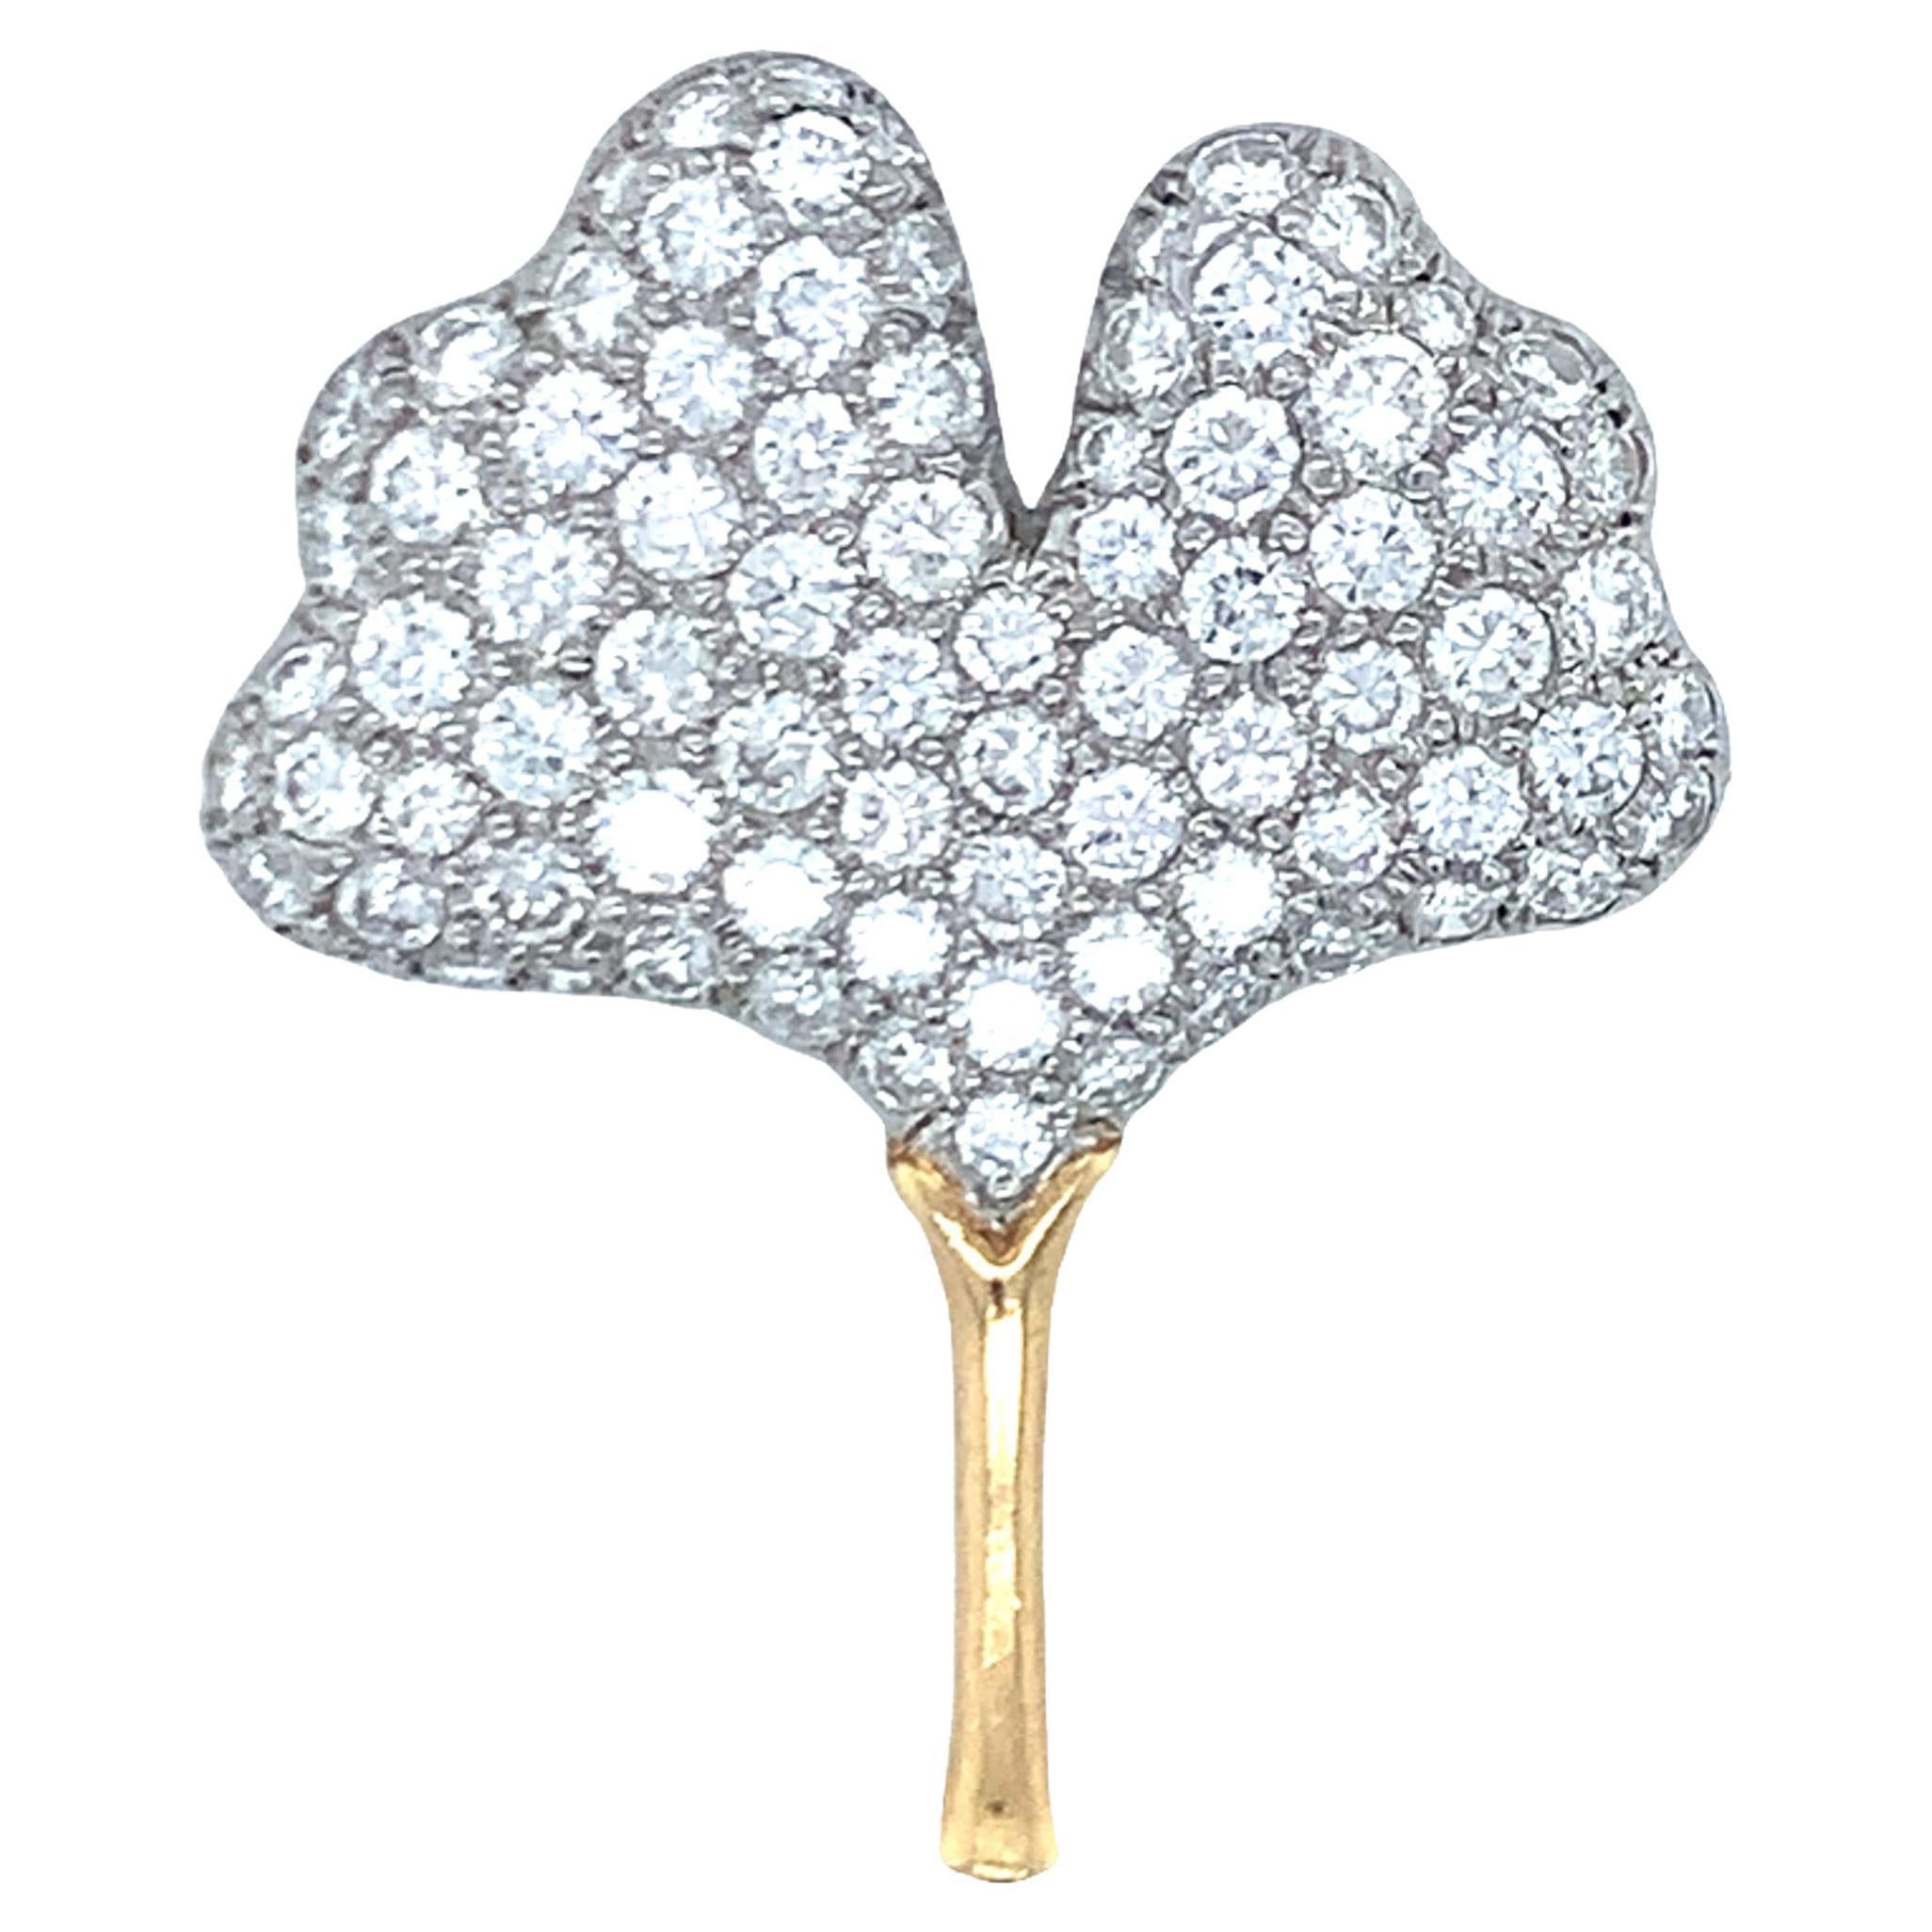 Leaf Motif Diamond Platinum and 18K Gold Pin by Tiffany & Co.